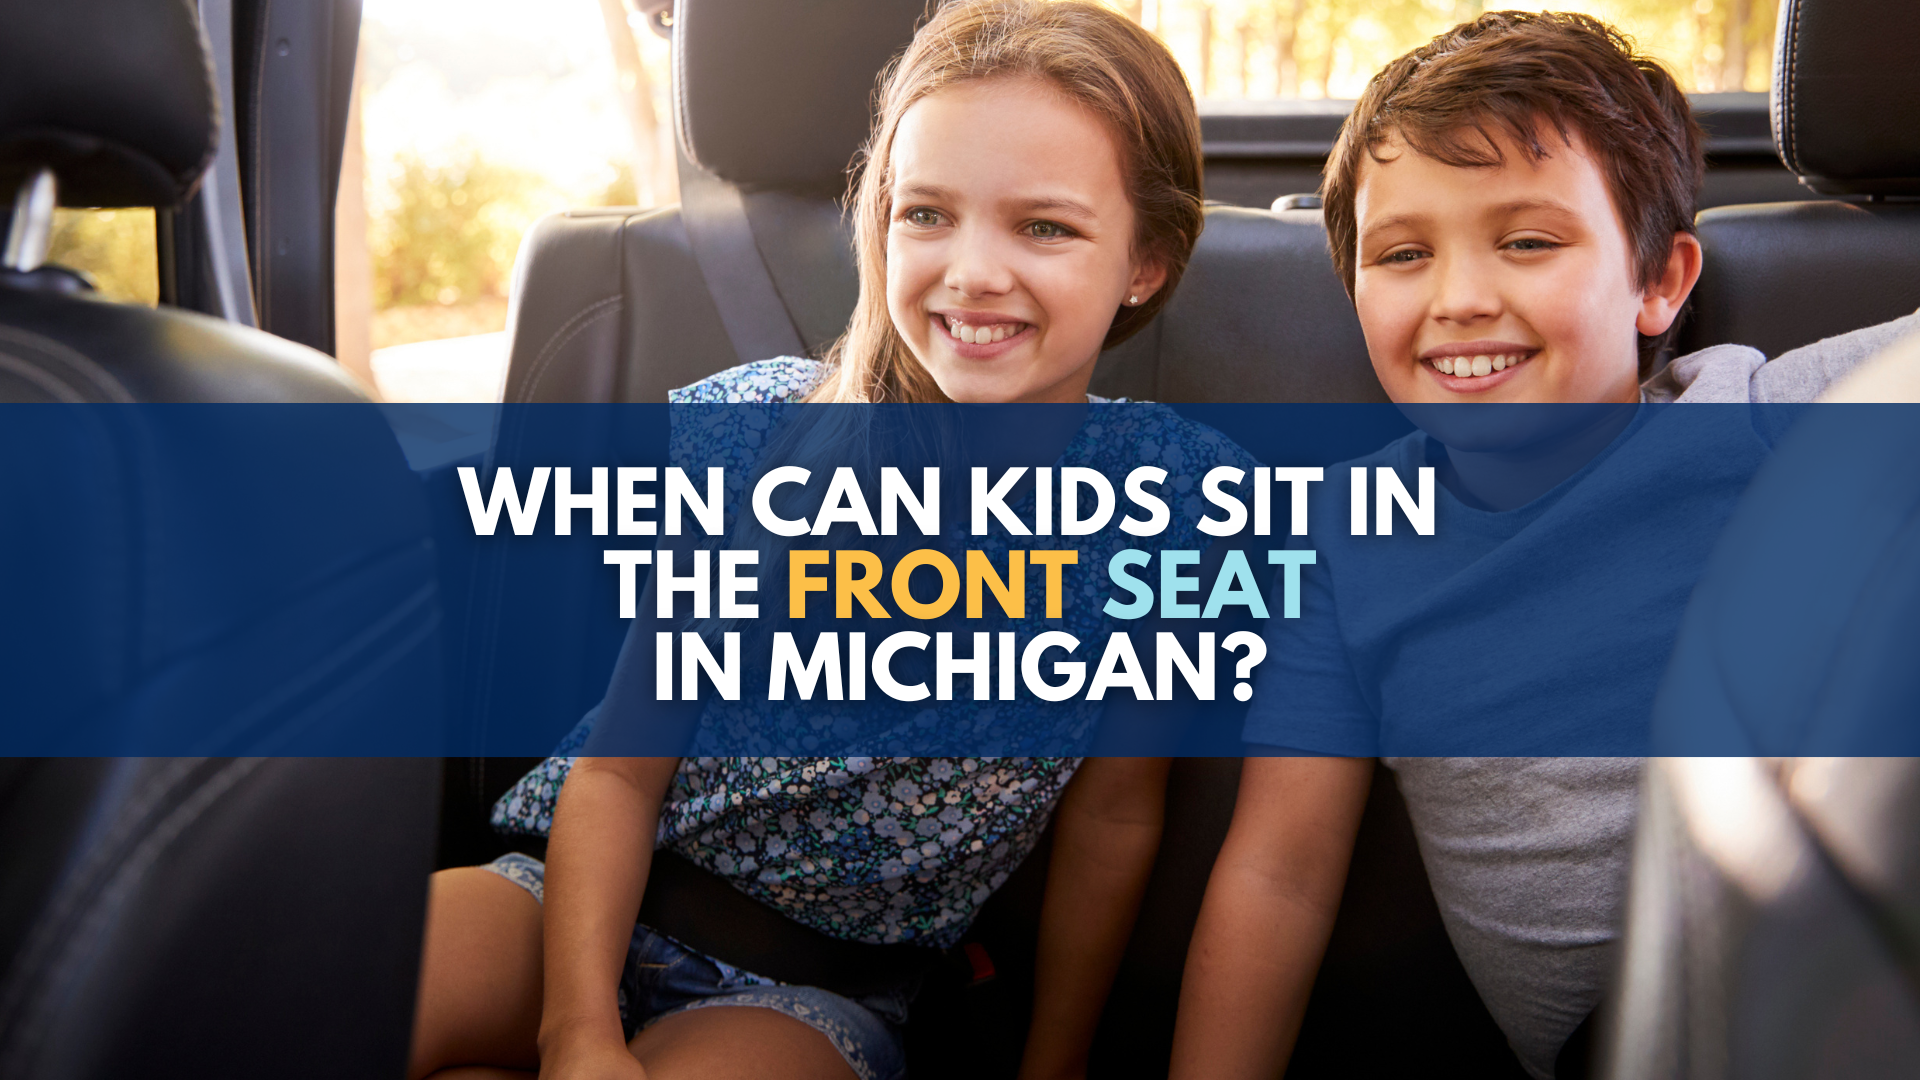 When Can Kids Sit in the Front Seat in Michigan?